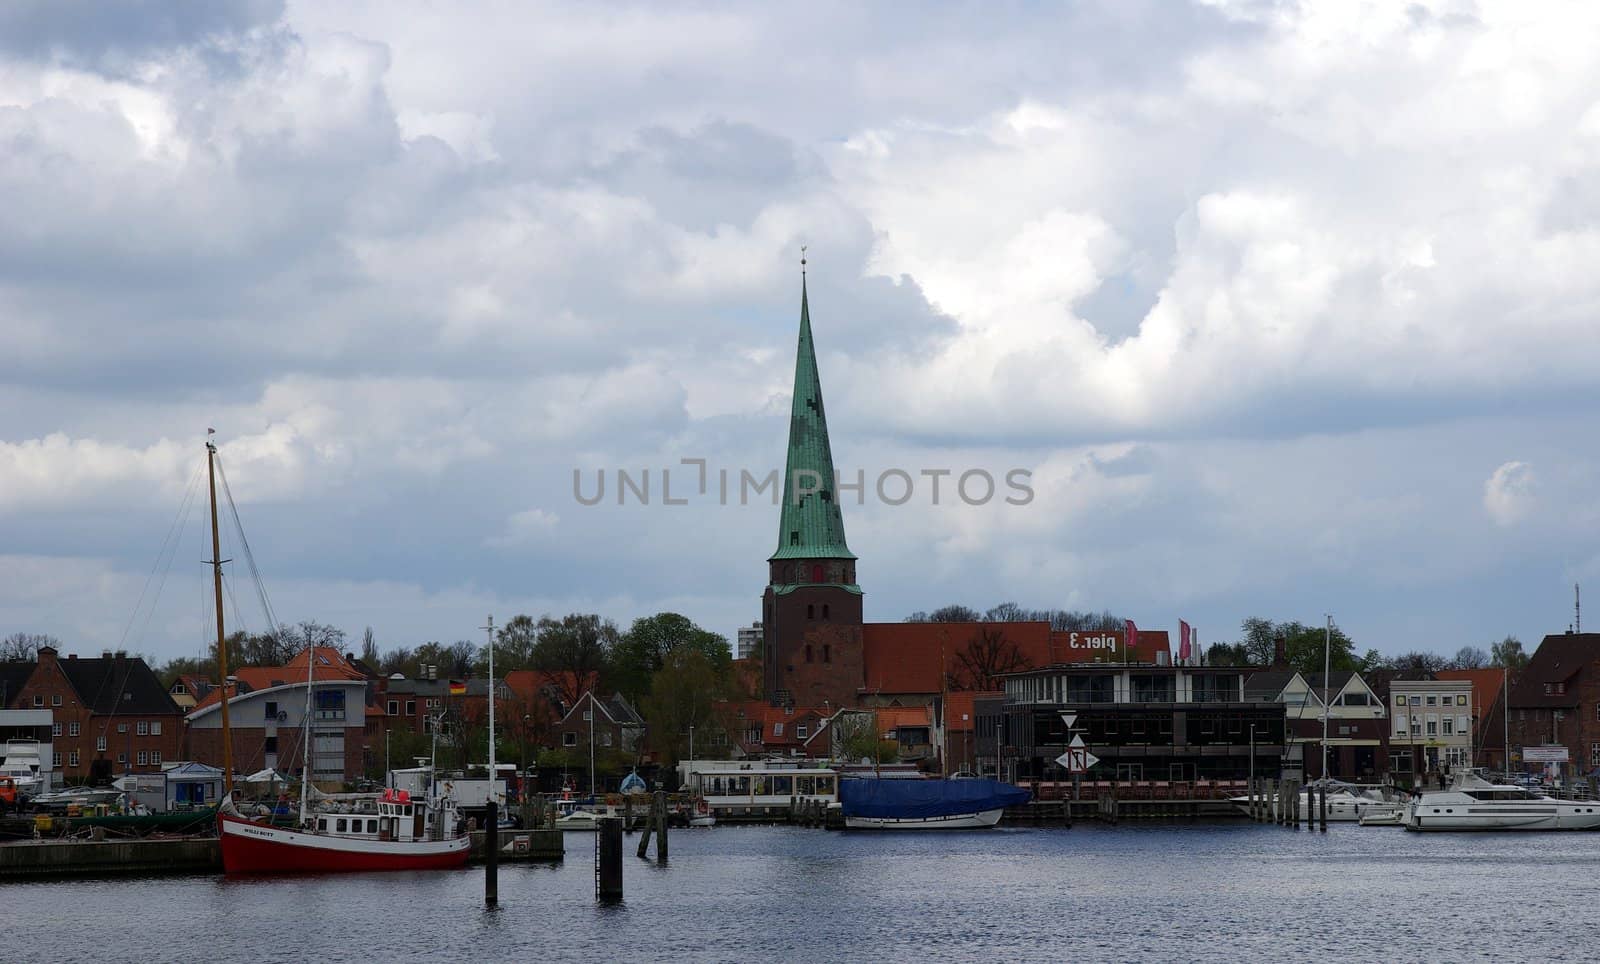 The port and the old town of Travemuende